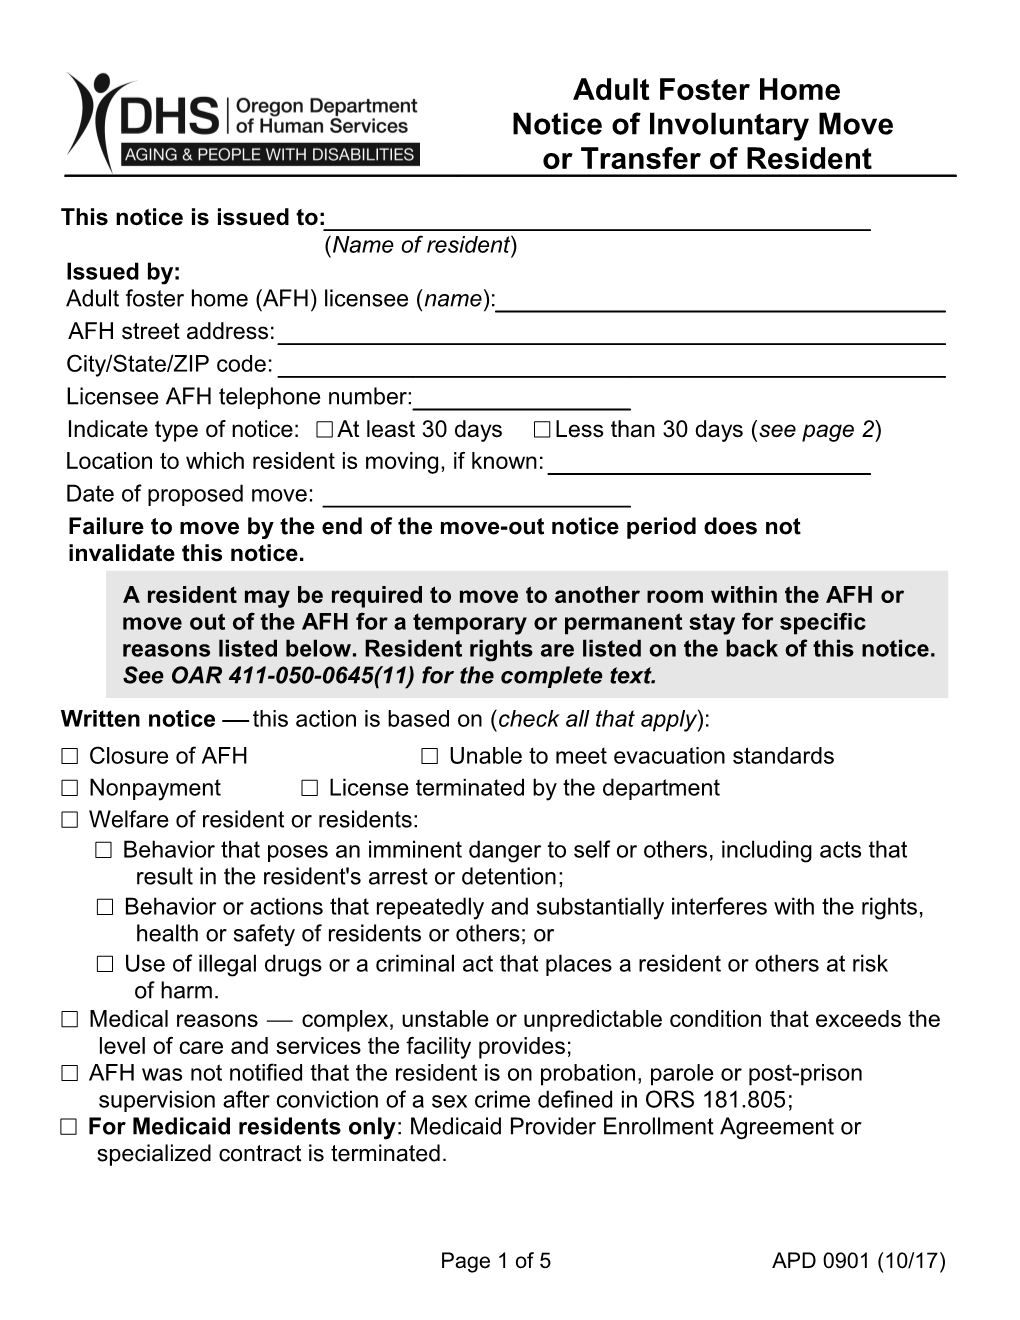 AFH- Notice of Involuntary Move Or Transfer of Resident (SDS 901 1/14)